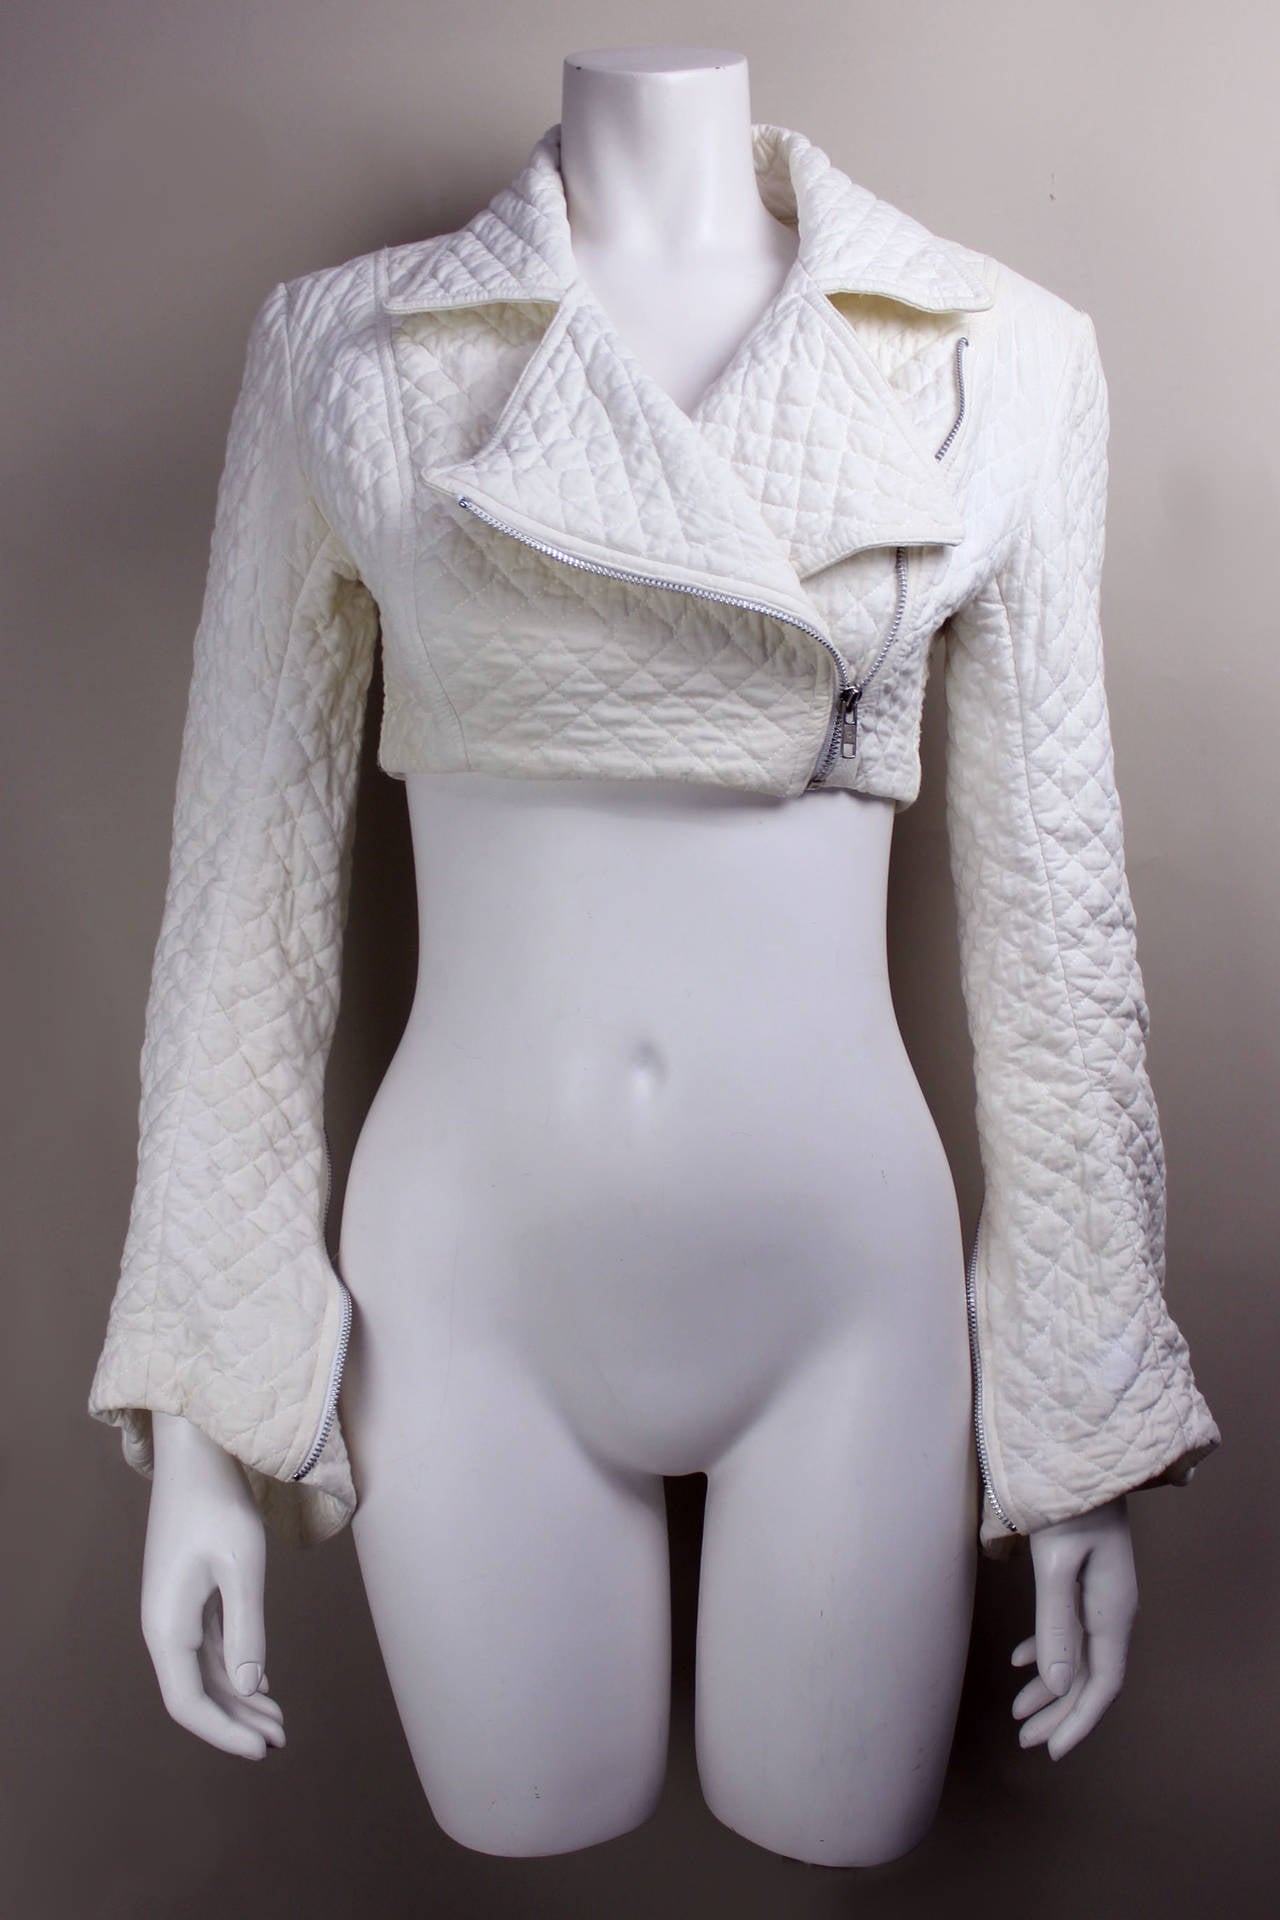 This Norma Kamali jacket is an exceptional piece. It is very cropped with long narrow sleeves that can be unzipped into an exaggerated bell shape. It is of cream-colored quilted fabric and has a side zip in the style of a motorcycle jacket.